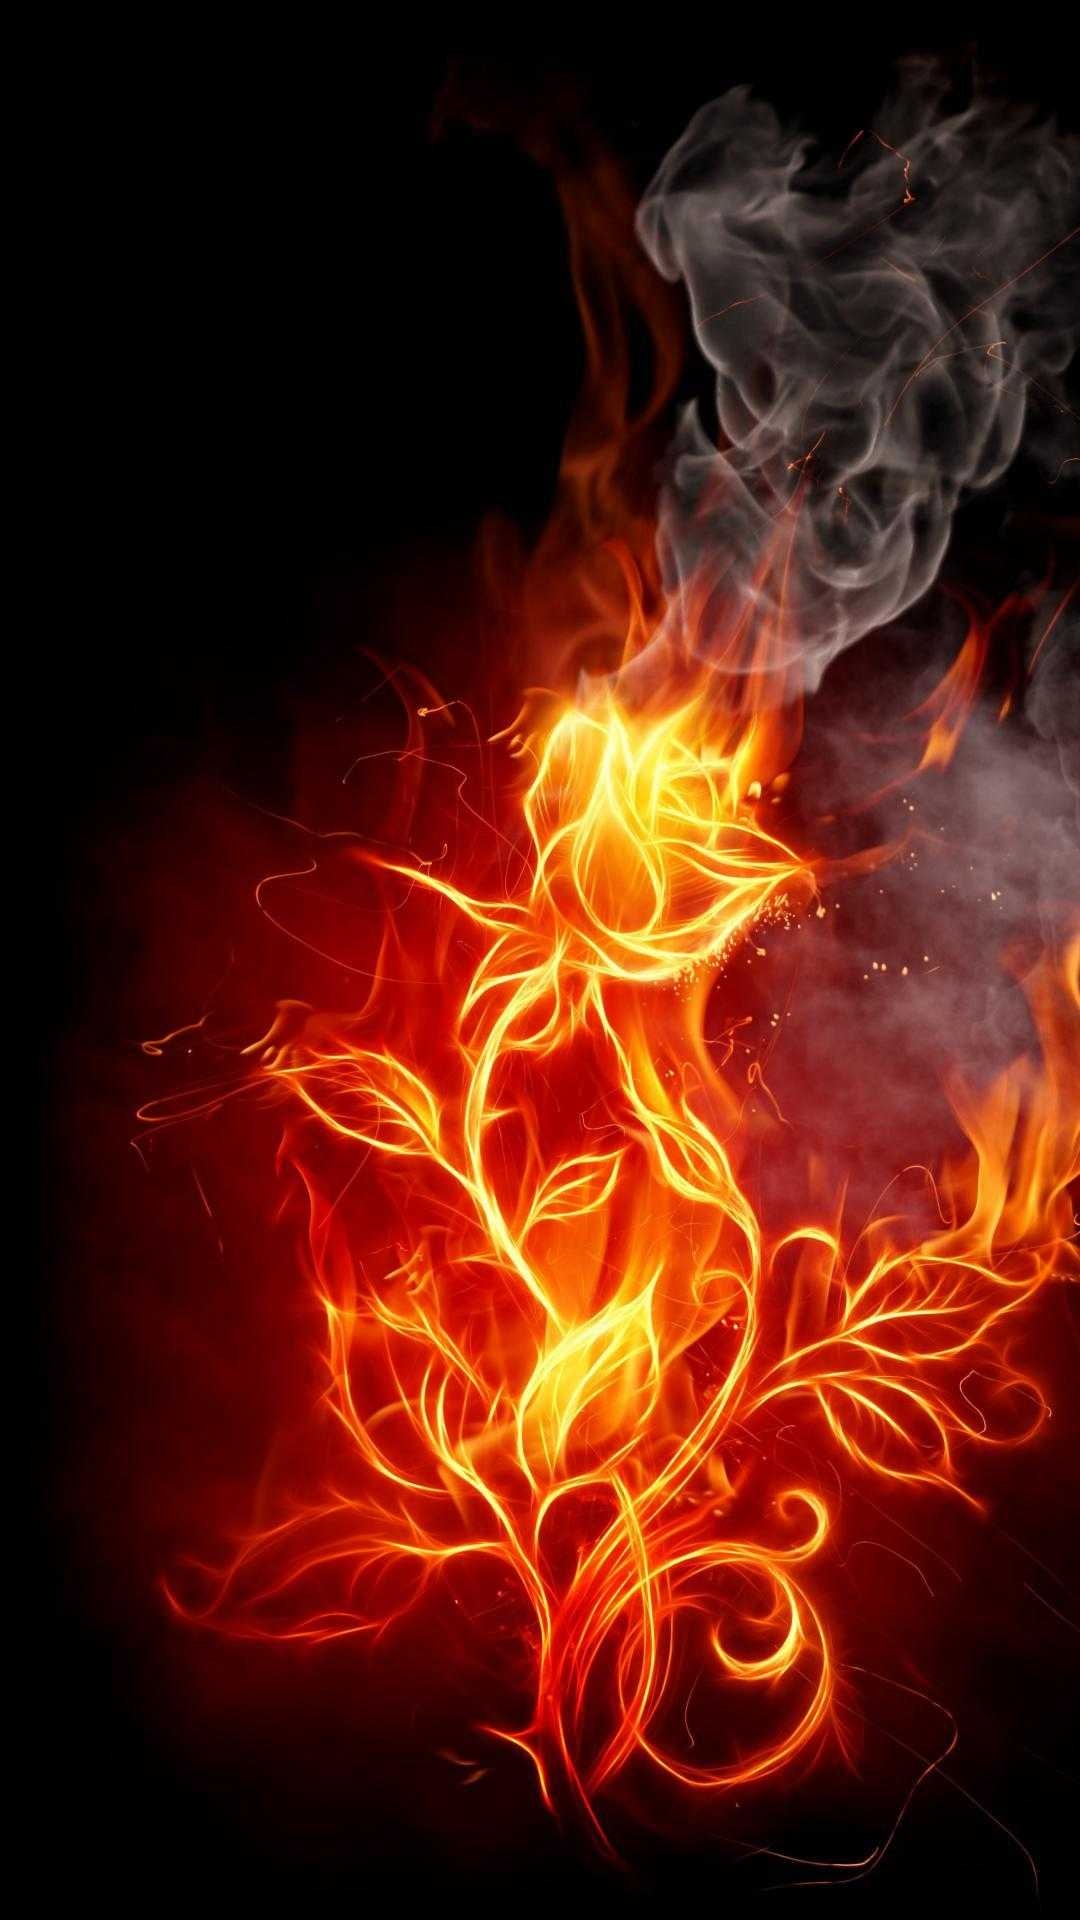 Blazing heat, HD fire wallpaper, Intense flames, Vibrant colors, Warmth and energy, 1080x1920 Full HD Handy